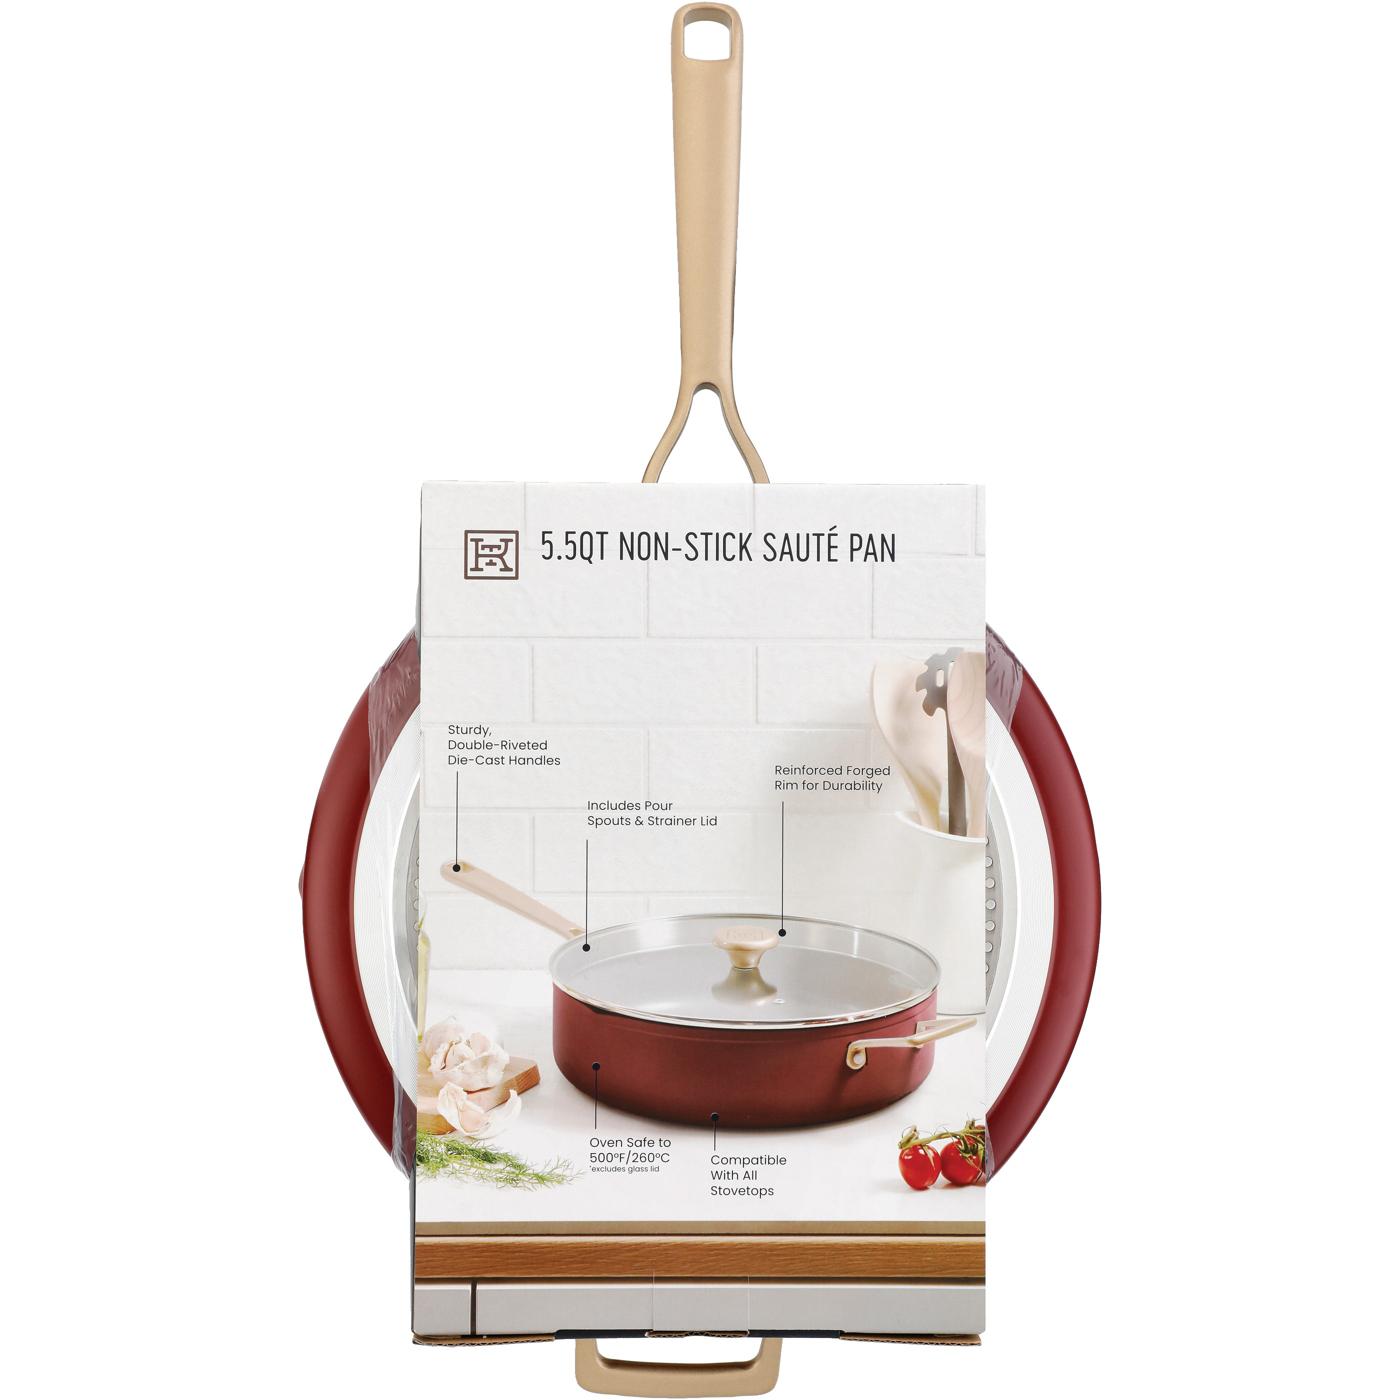 Kitchen & Table by H-E-B Non-Stick Sauté Pan with Strainer Lid - Bordeaux Red; image 2 of 7